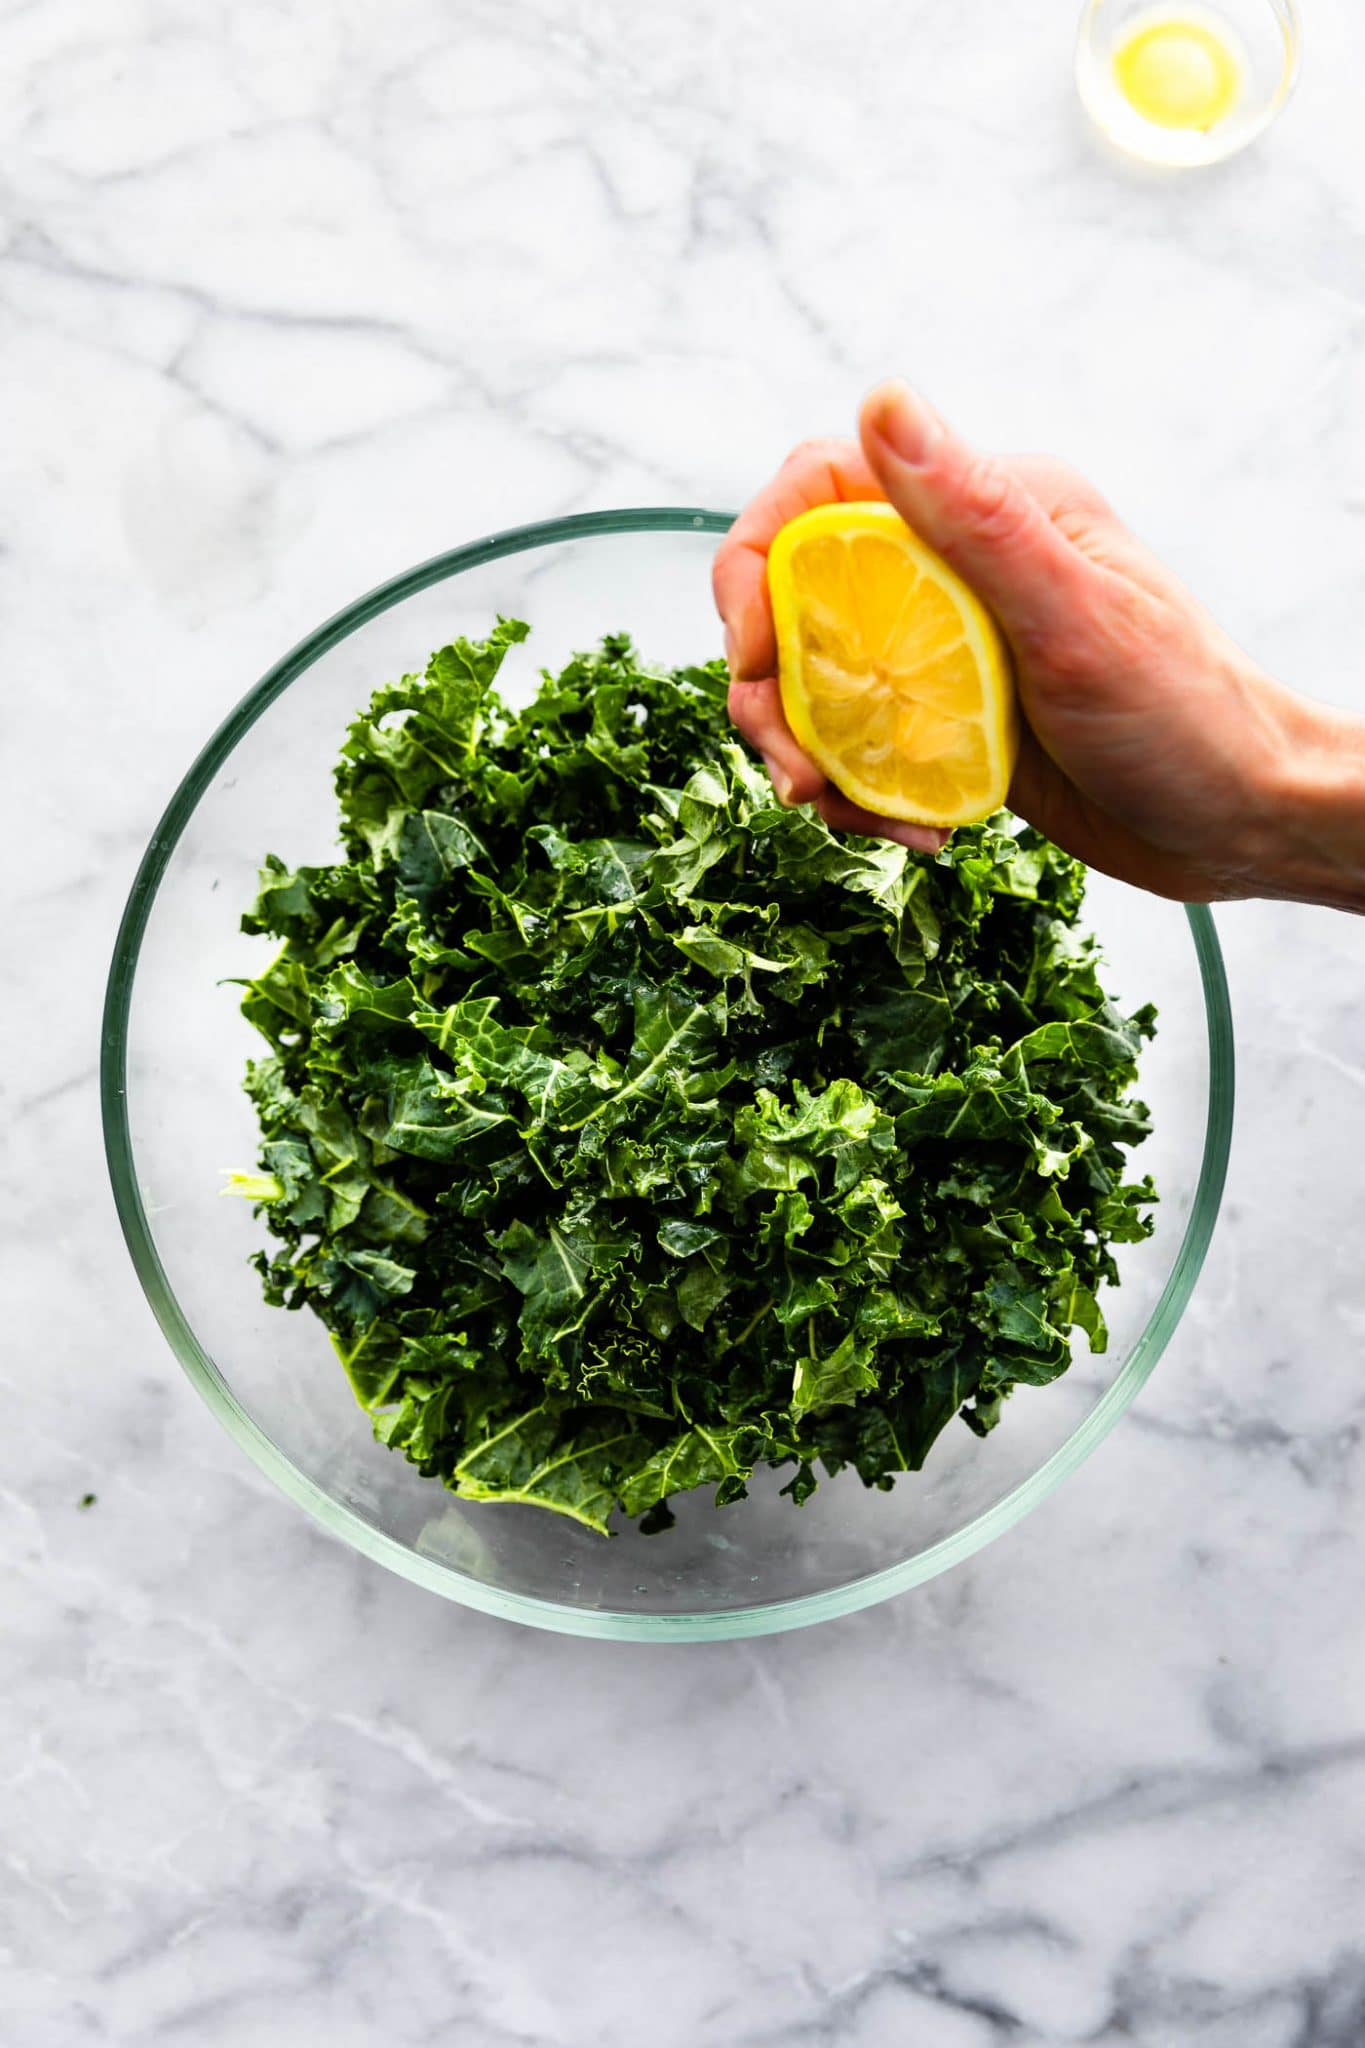 A hand squeezing fresh lemon over chopped fresh kale in clear glass bowl.